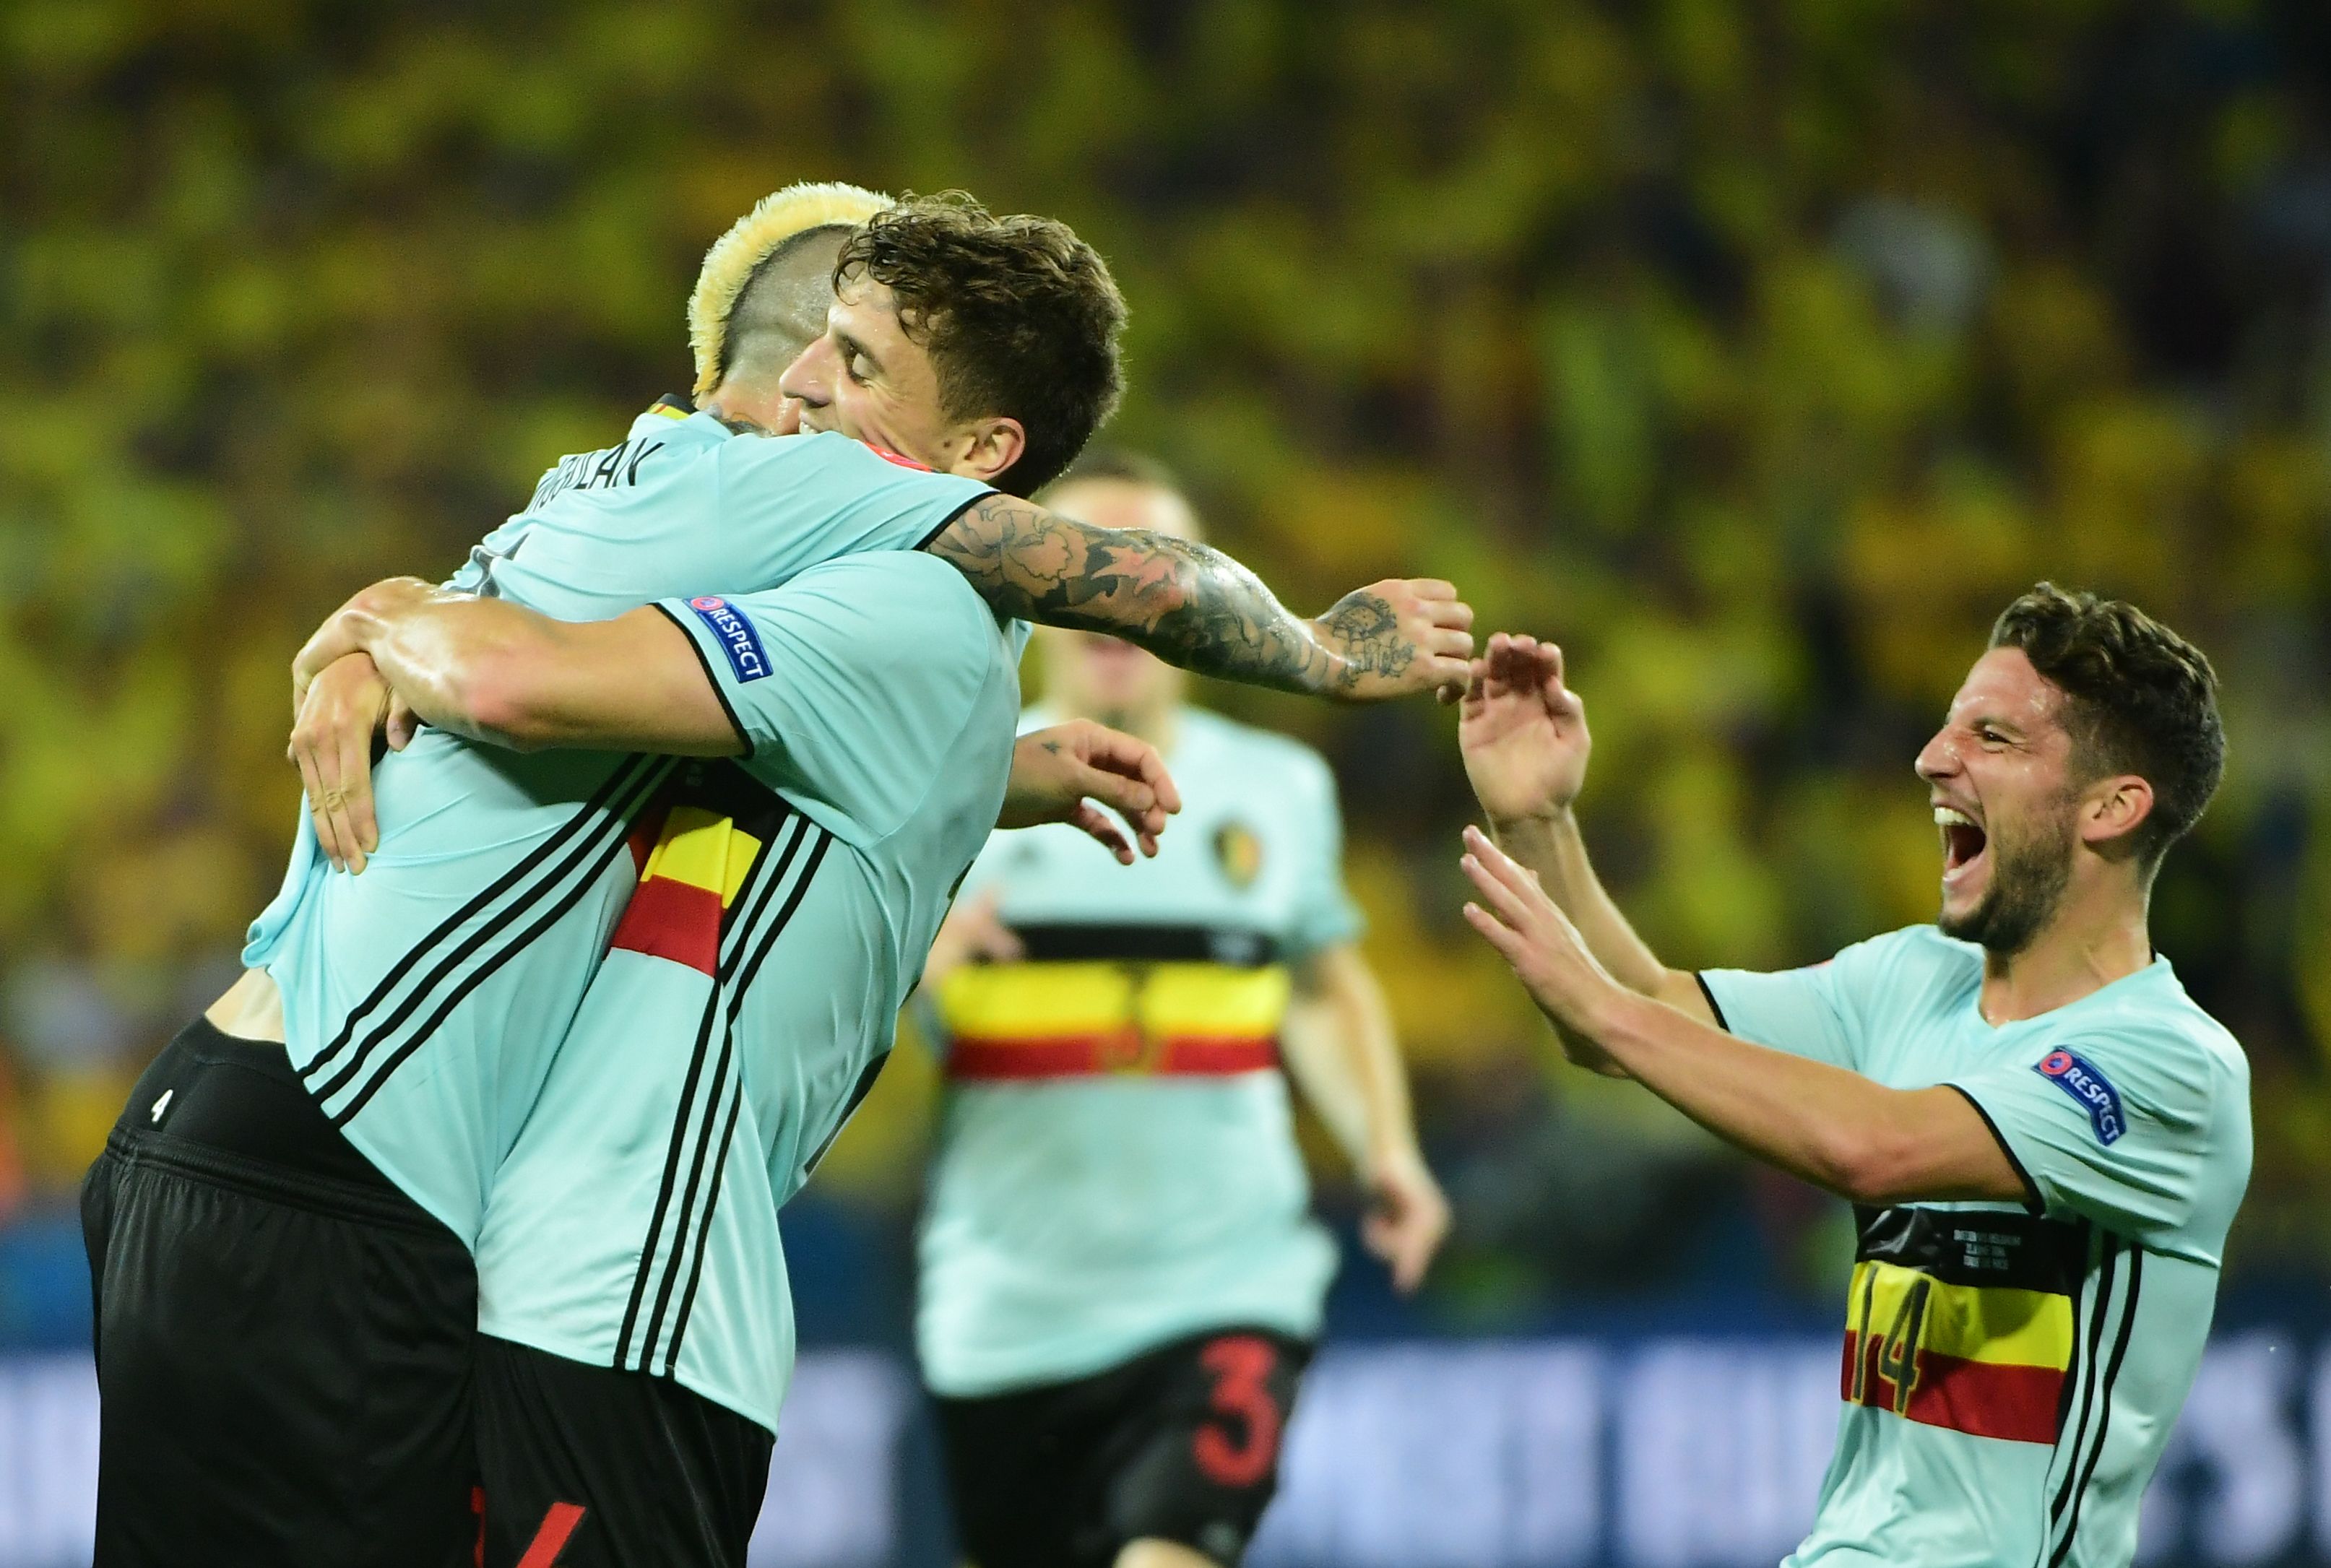 Belgium's midfielder Radja Nainggolan (L) celebrates a goal with teammates during the Euro 2016 group E football match between Sweden and Belgium at the Allianz Riviera stadium in Nice on June 22, 2016. / AFP / EMMANUEL DUNAND        (Photo credit should read EMMANUEL DUNAND/AFP/Getty Images)